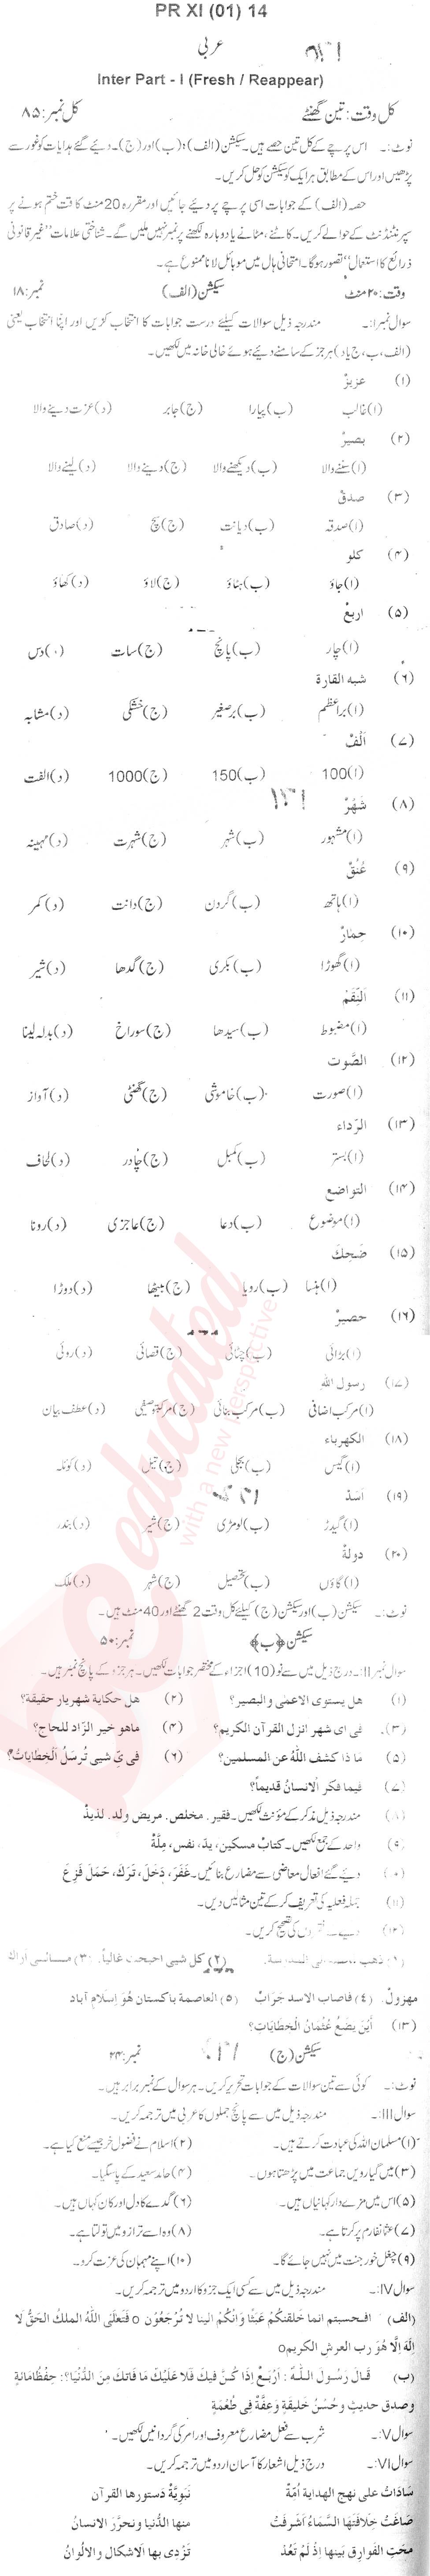 Arabic FA Part 1 Past Paper Group 1 BISE Abbottabad 2014